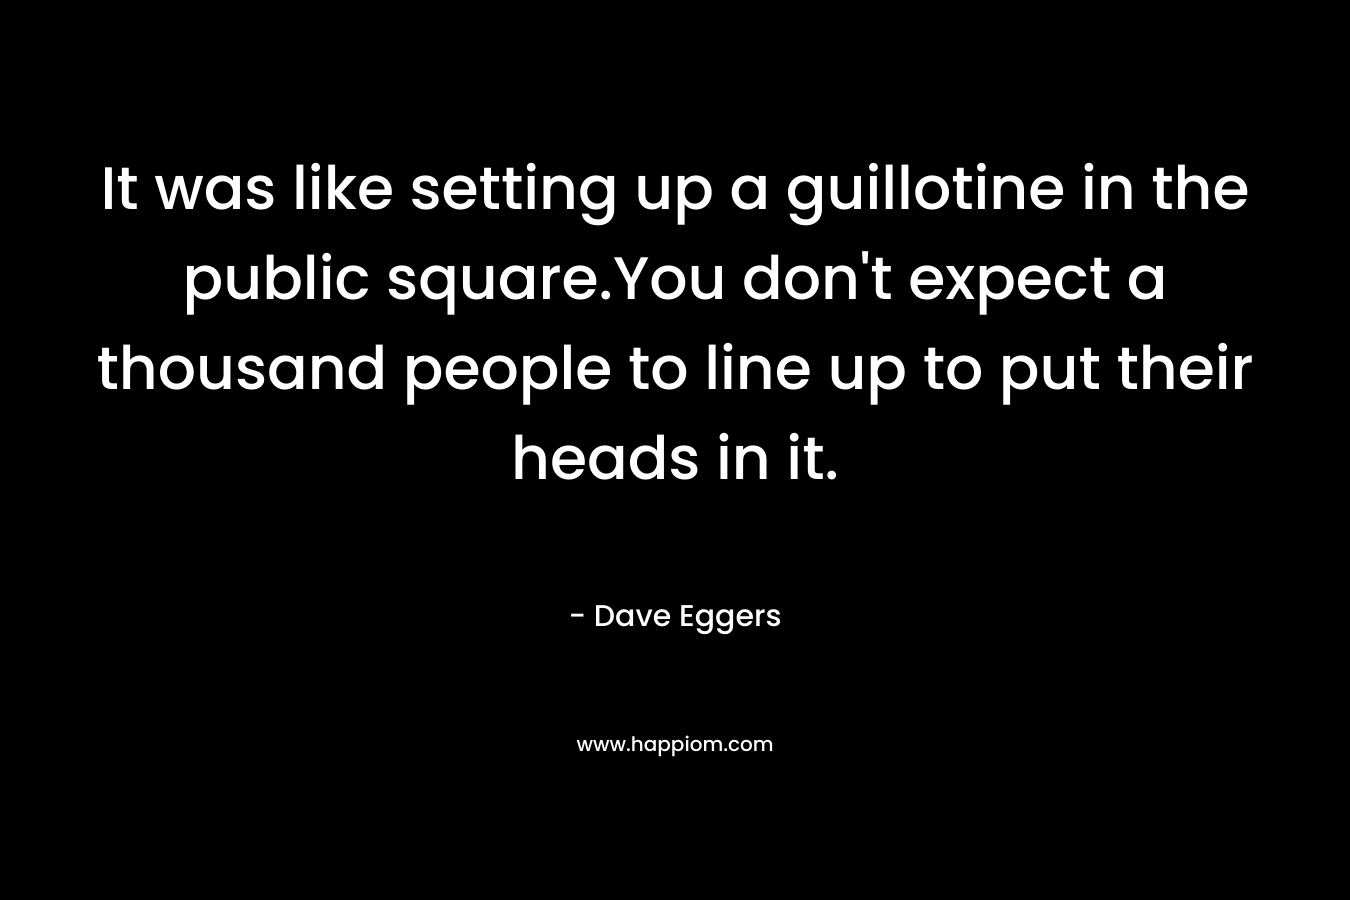 It was like setting up a guillotine in the public square.You don’t expect a thousand people to line up to put their heads in it. – Dave Eggers